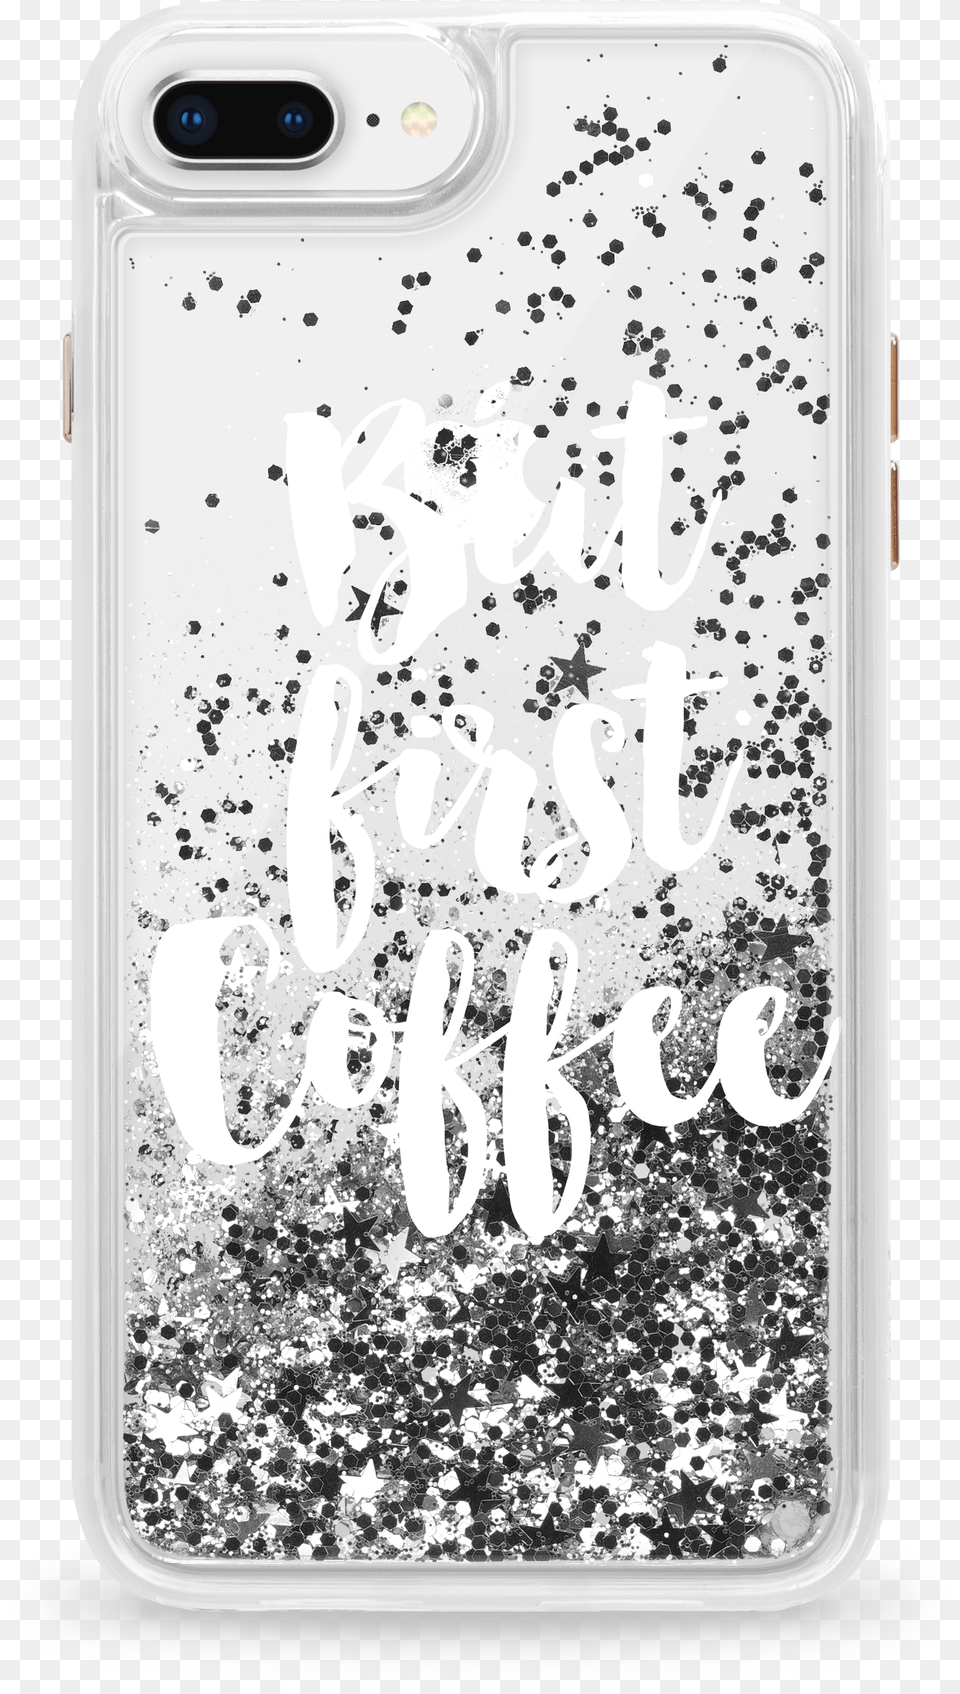 Hd Open High Resolution Image Cover Iphone 66s7 Casetify Gliter, Electronics, Mobile Phone, Phone, Glitter Free Png Download